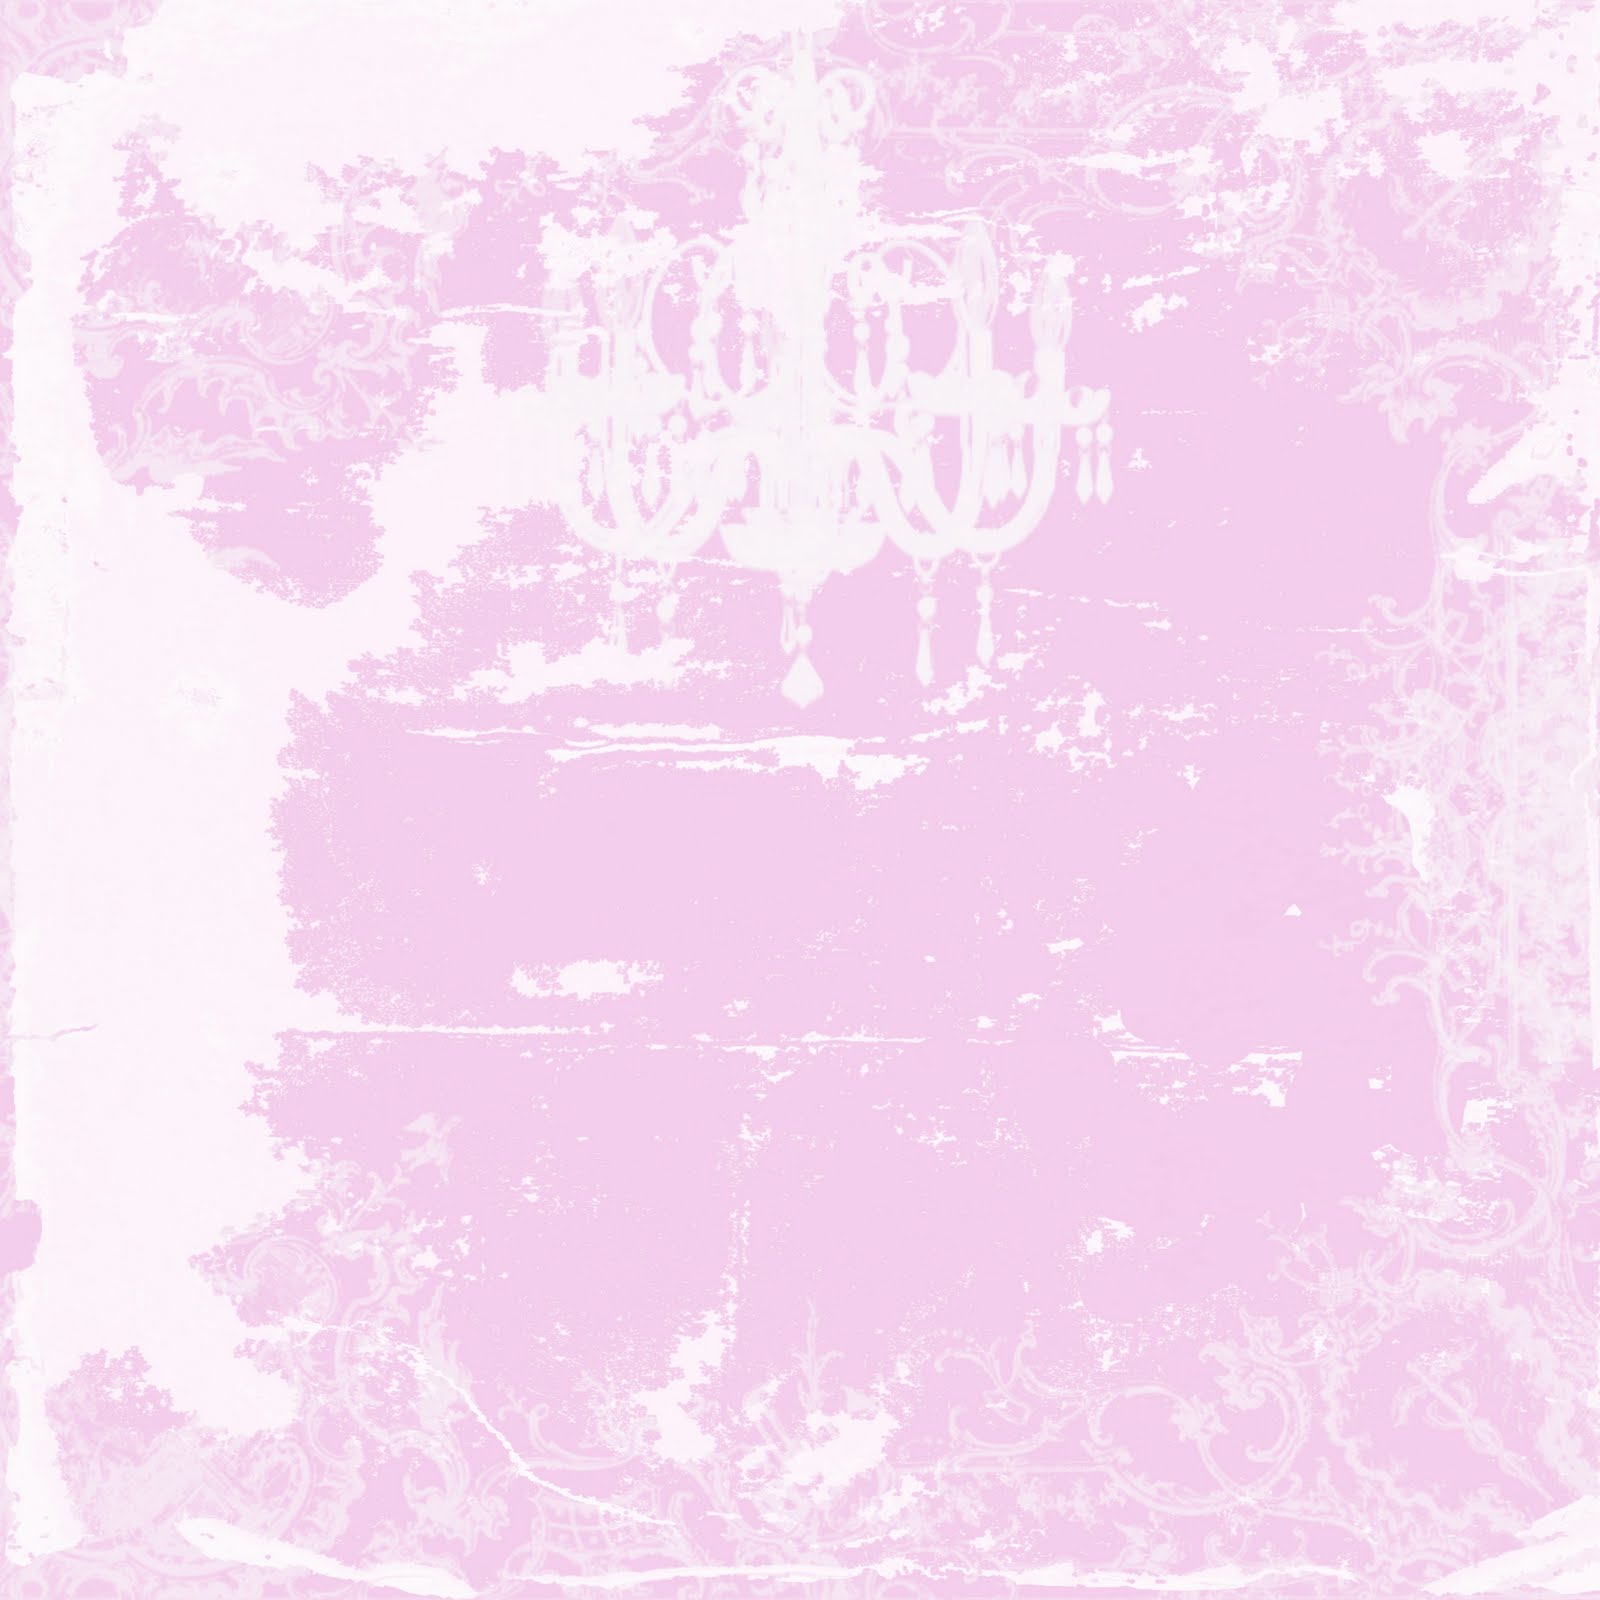 Goose Shabby Baby Pink Digital Background With Chandelier